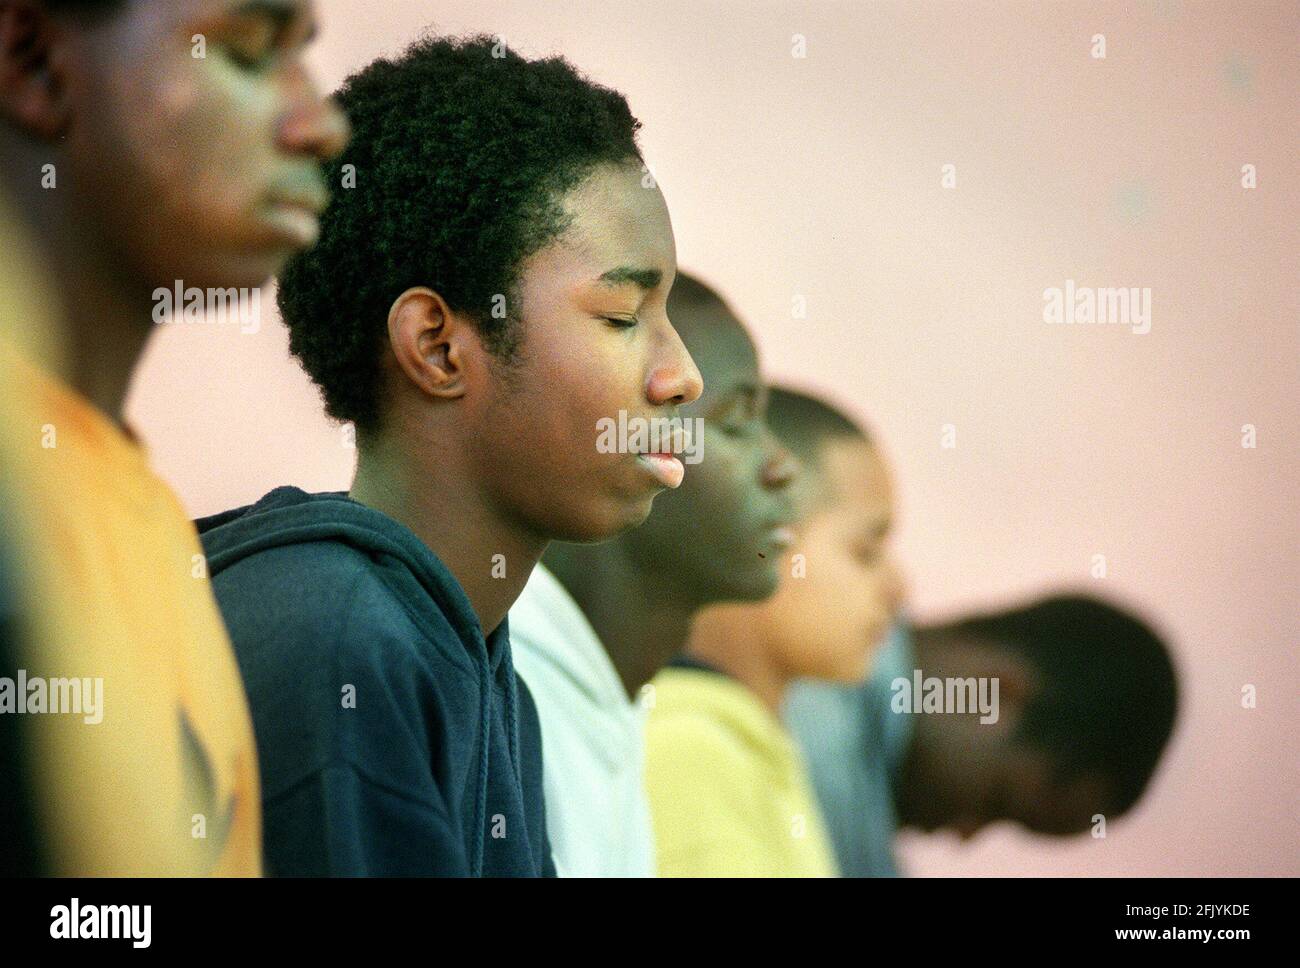 A MEDITATION SESSION AT THE BOYHOOD TO MANHOOD NOV 2000 FOUNDATION AT A COMMUNITY CENTRE ON THE NORTH PECKHAM ESTATE. THE FOUNDATION TAKES ON BOYS,SOME OF WHICH HAVE BEEN EXCLUDED FROM SCHOOL AND HELPS THEM COPE WITH  GROWING UP IN  A DIFFICULT ENVIROMENT. Stock Photo